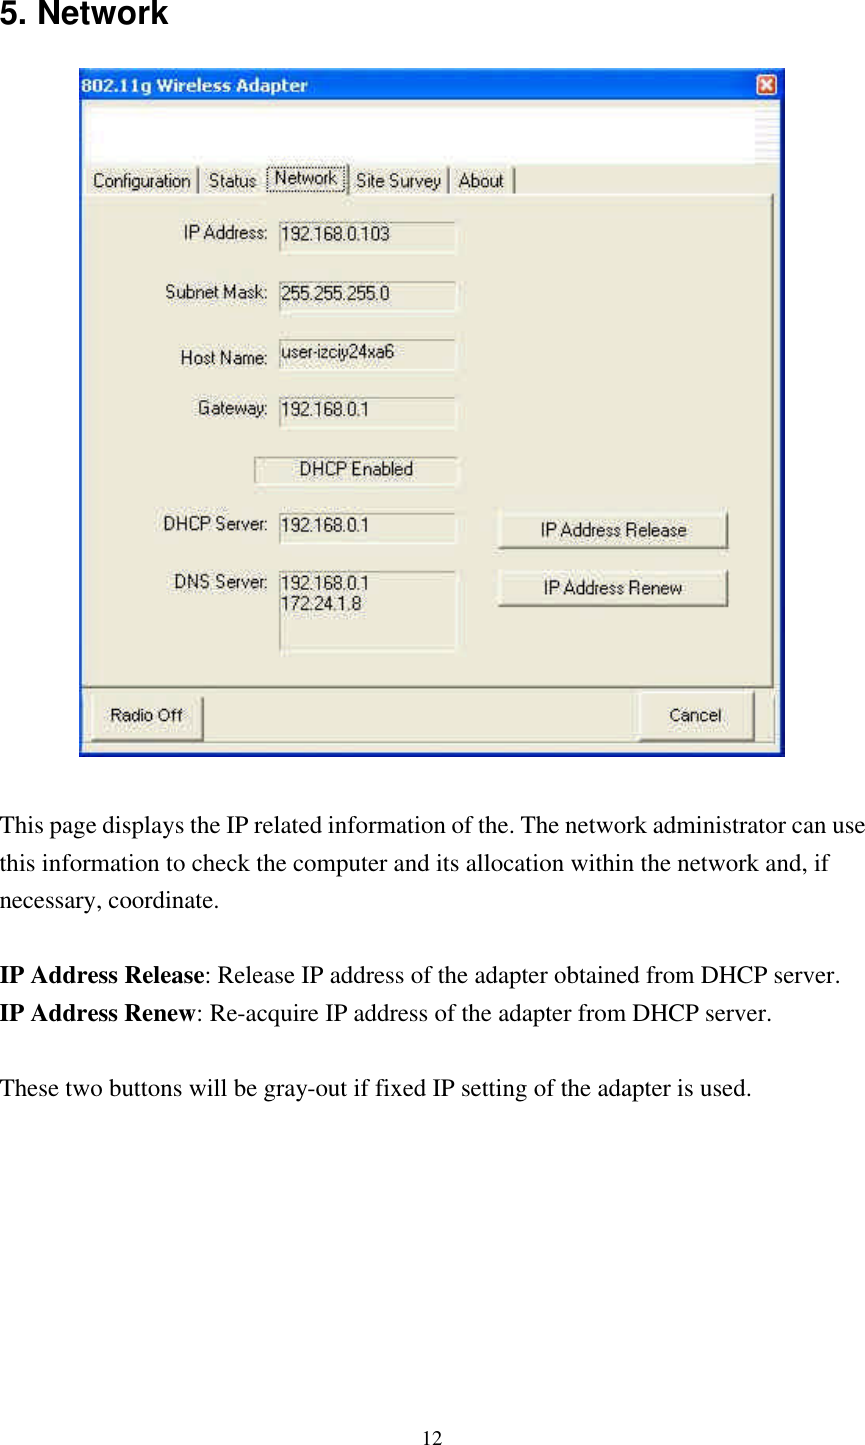 12 5. Network   This page displays the IP related information of the. The network administrator can use this information to check the computer and its allocation within the network and, if necessary, coordinate.  IP Address Release: Release IP address of the adapter obtained from DHCP server. IP Address Renew: Re-acquire IP address of the adapter from DHCP server.  These two buttons will be gray-out if fixed IP setting of the adapter is used.    